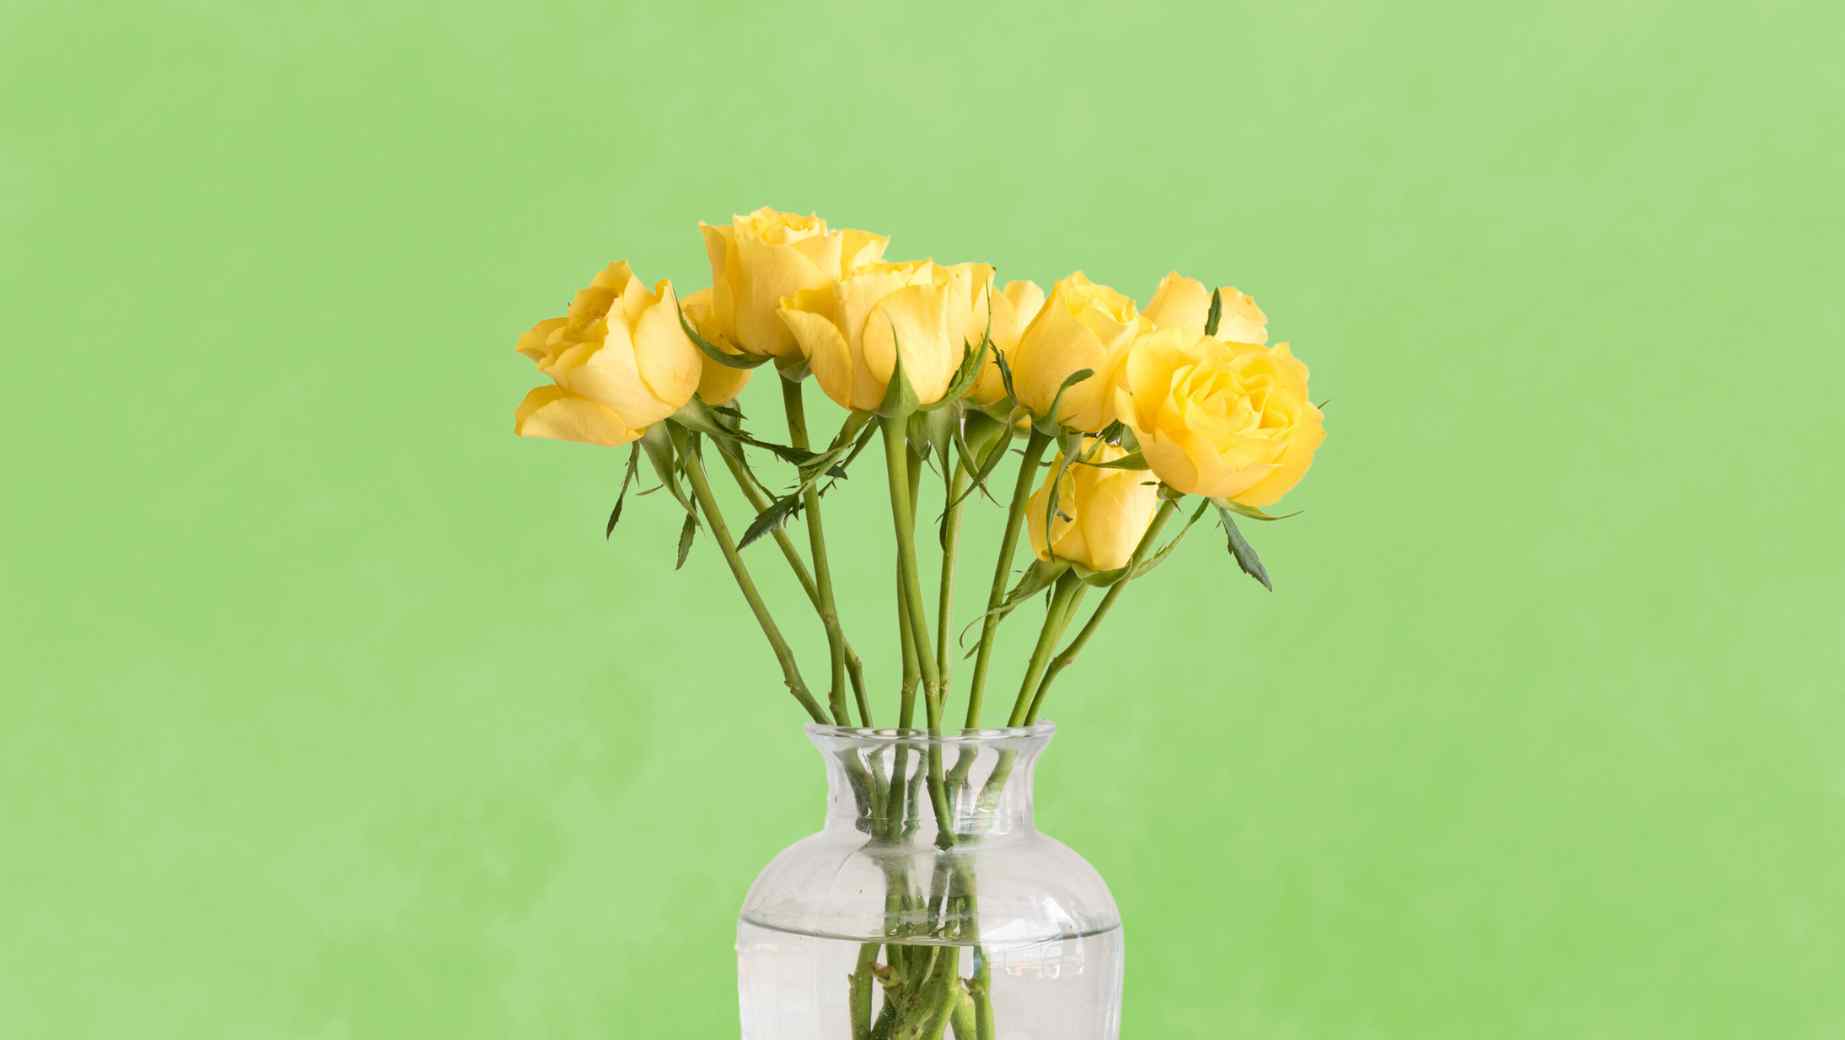 Bouquet of yellow roses in a clear glass vase against a green background